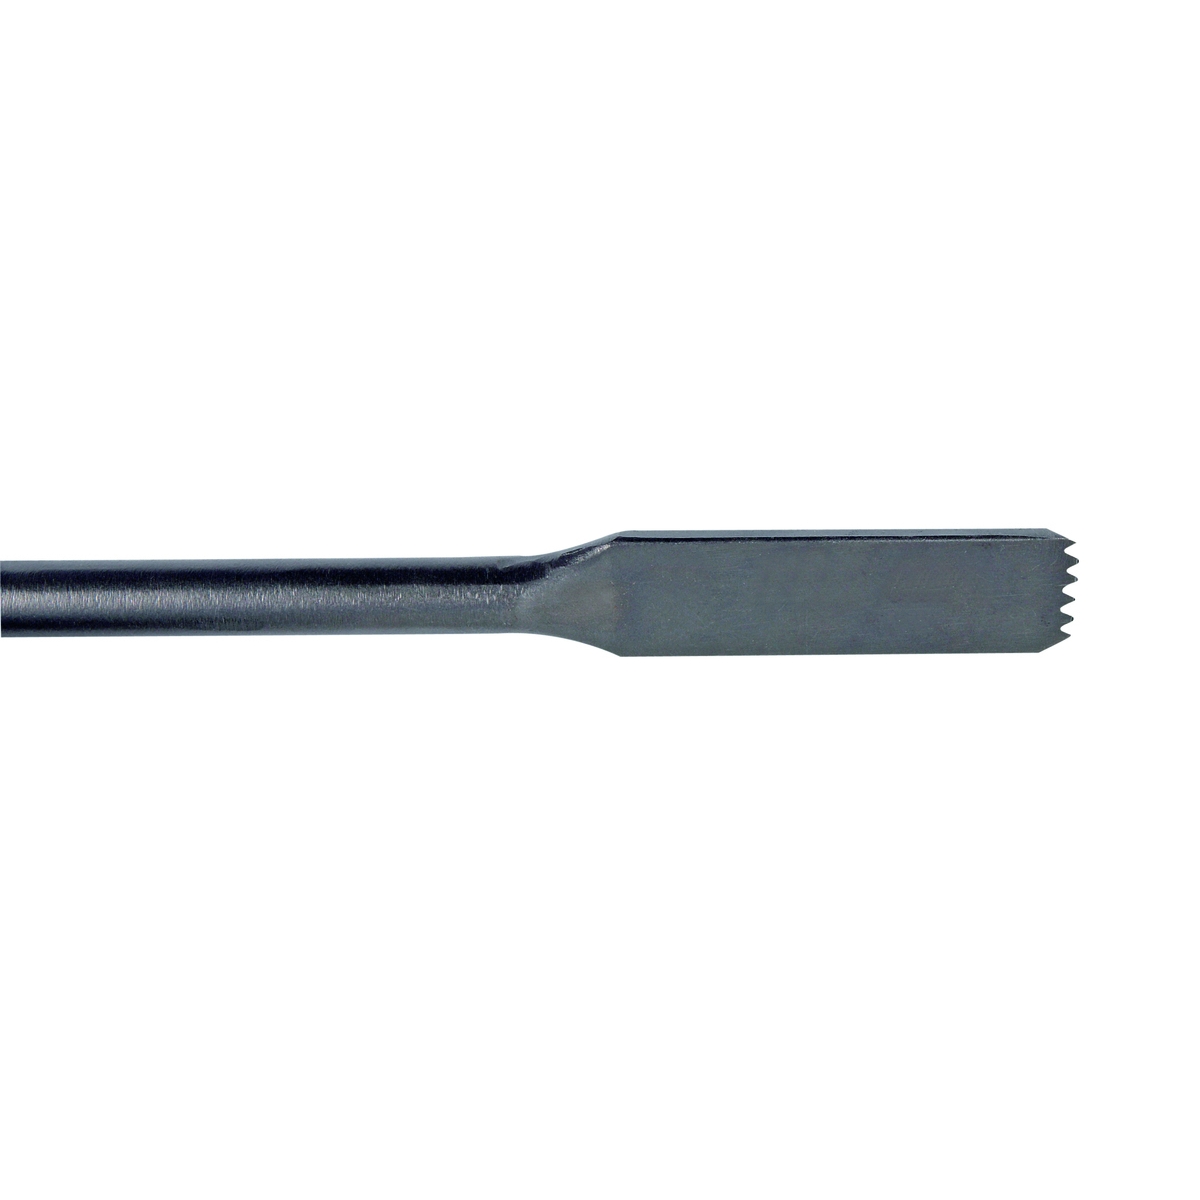 751001 MORTAR CHISEL TOOTHED 38X300MM SDS-MAX